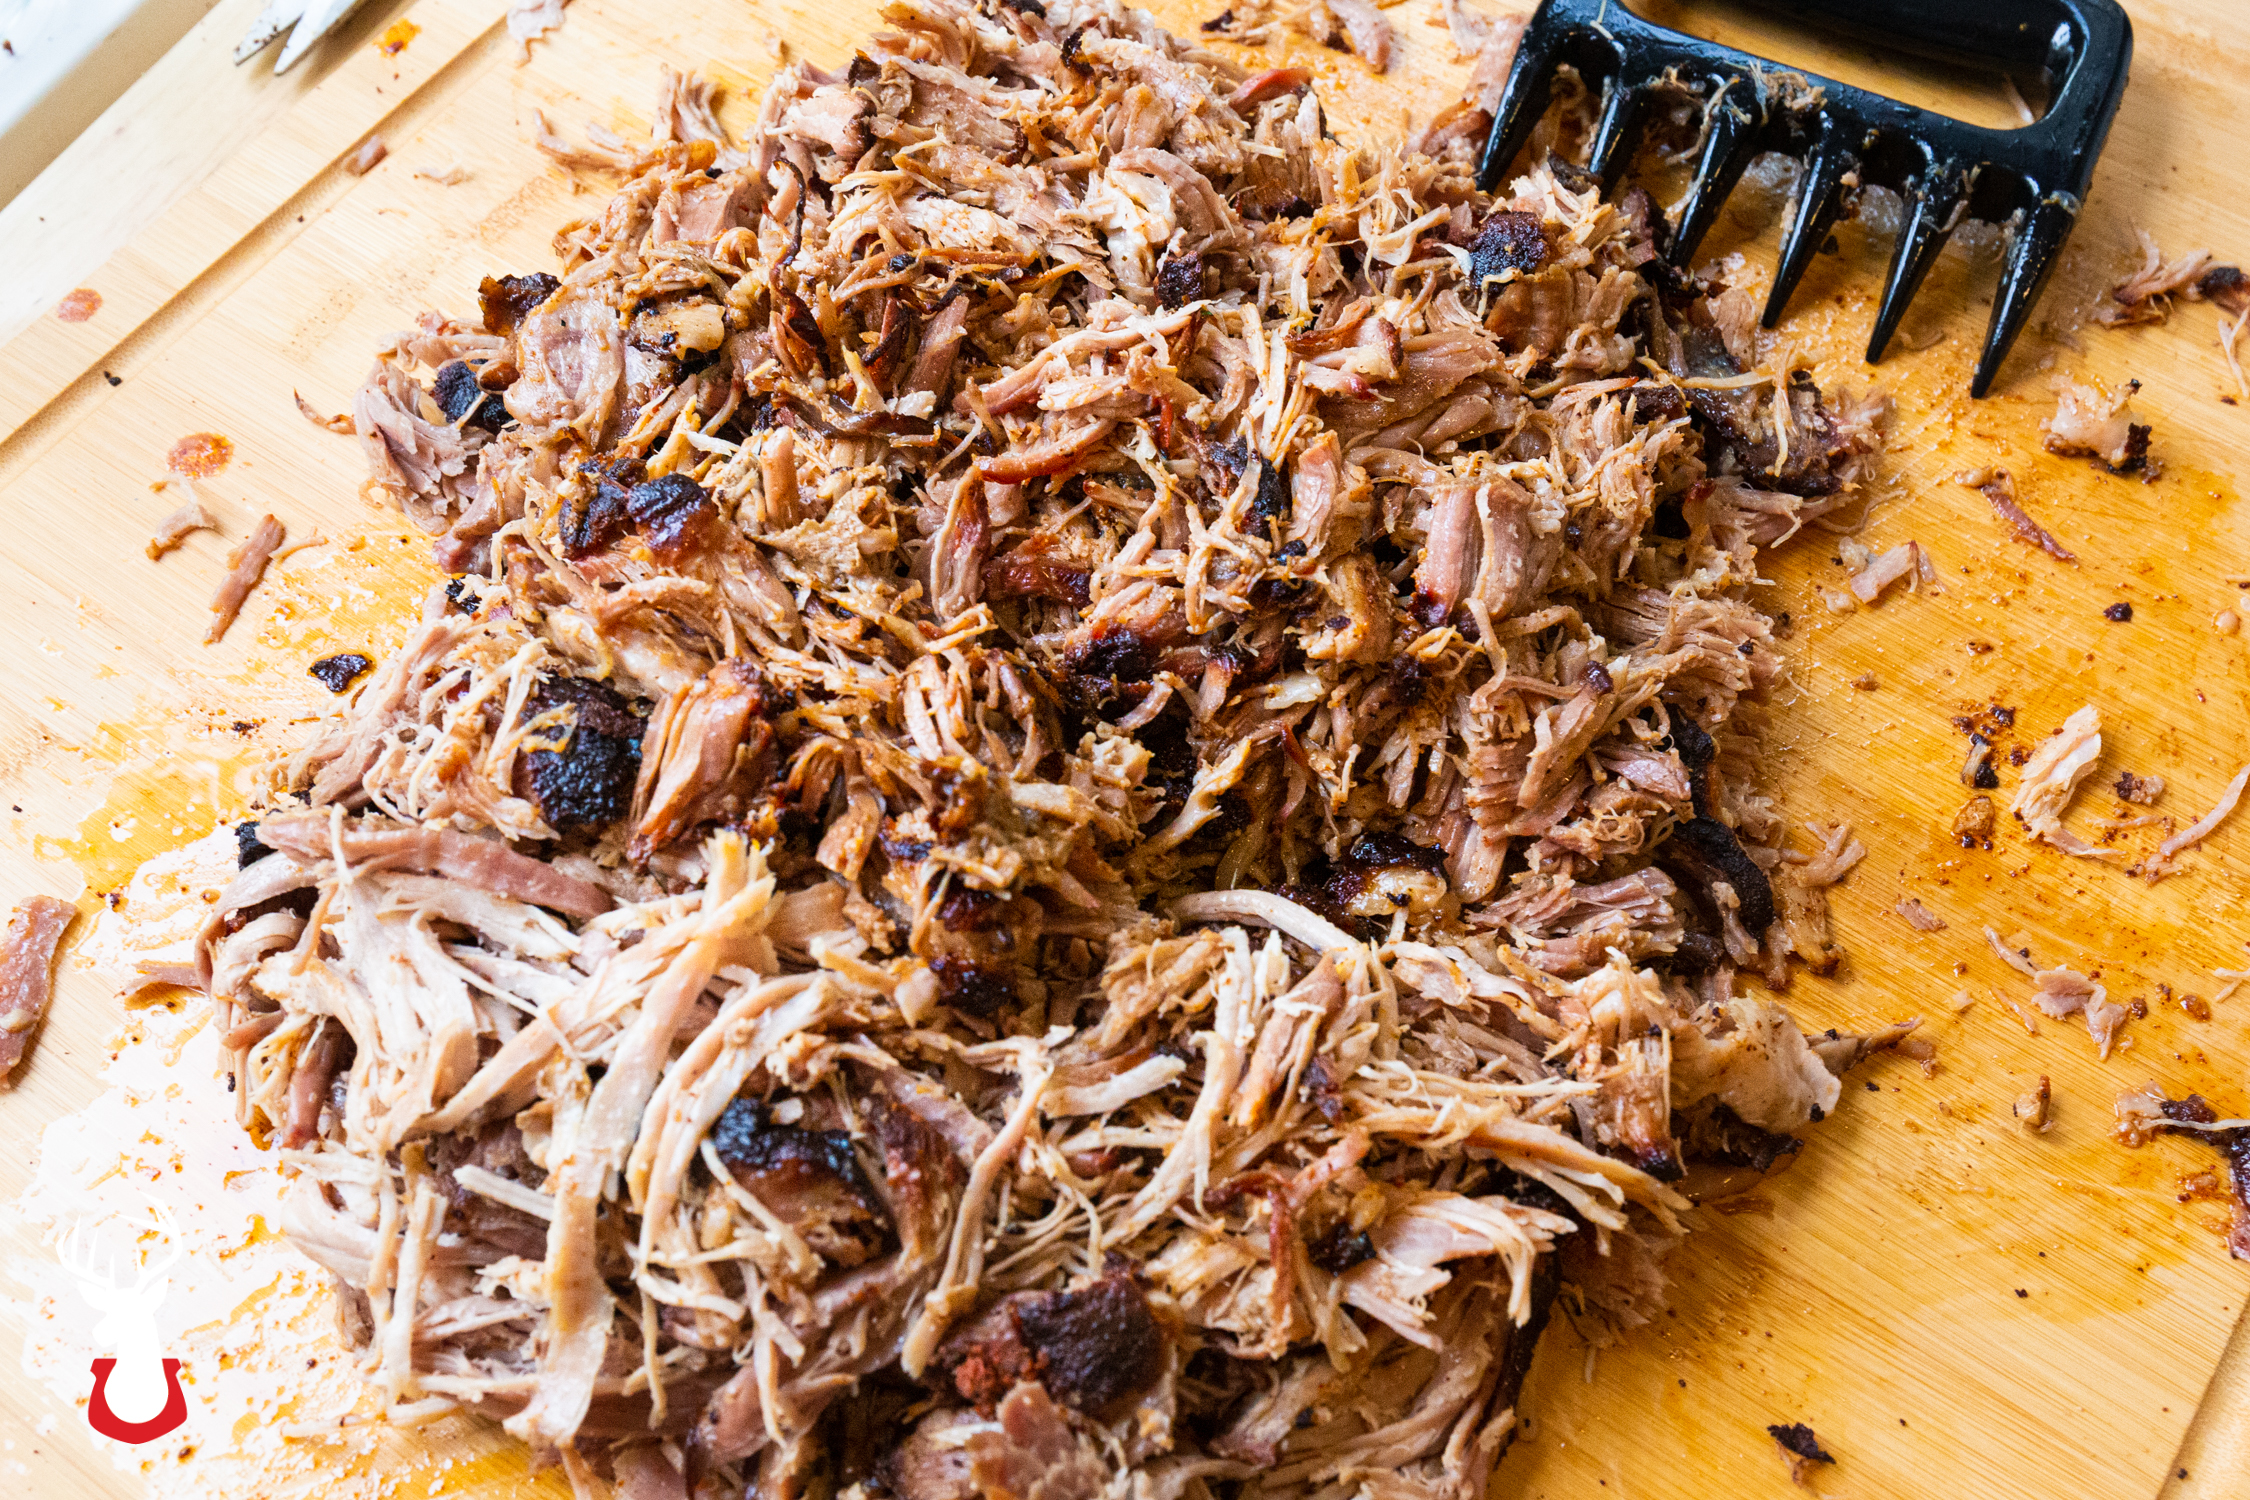 Smoke the pork butt to 200°F  for traditional pulled pork.